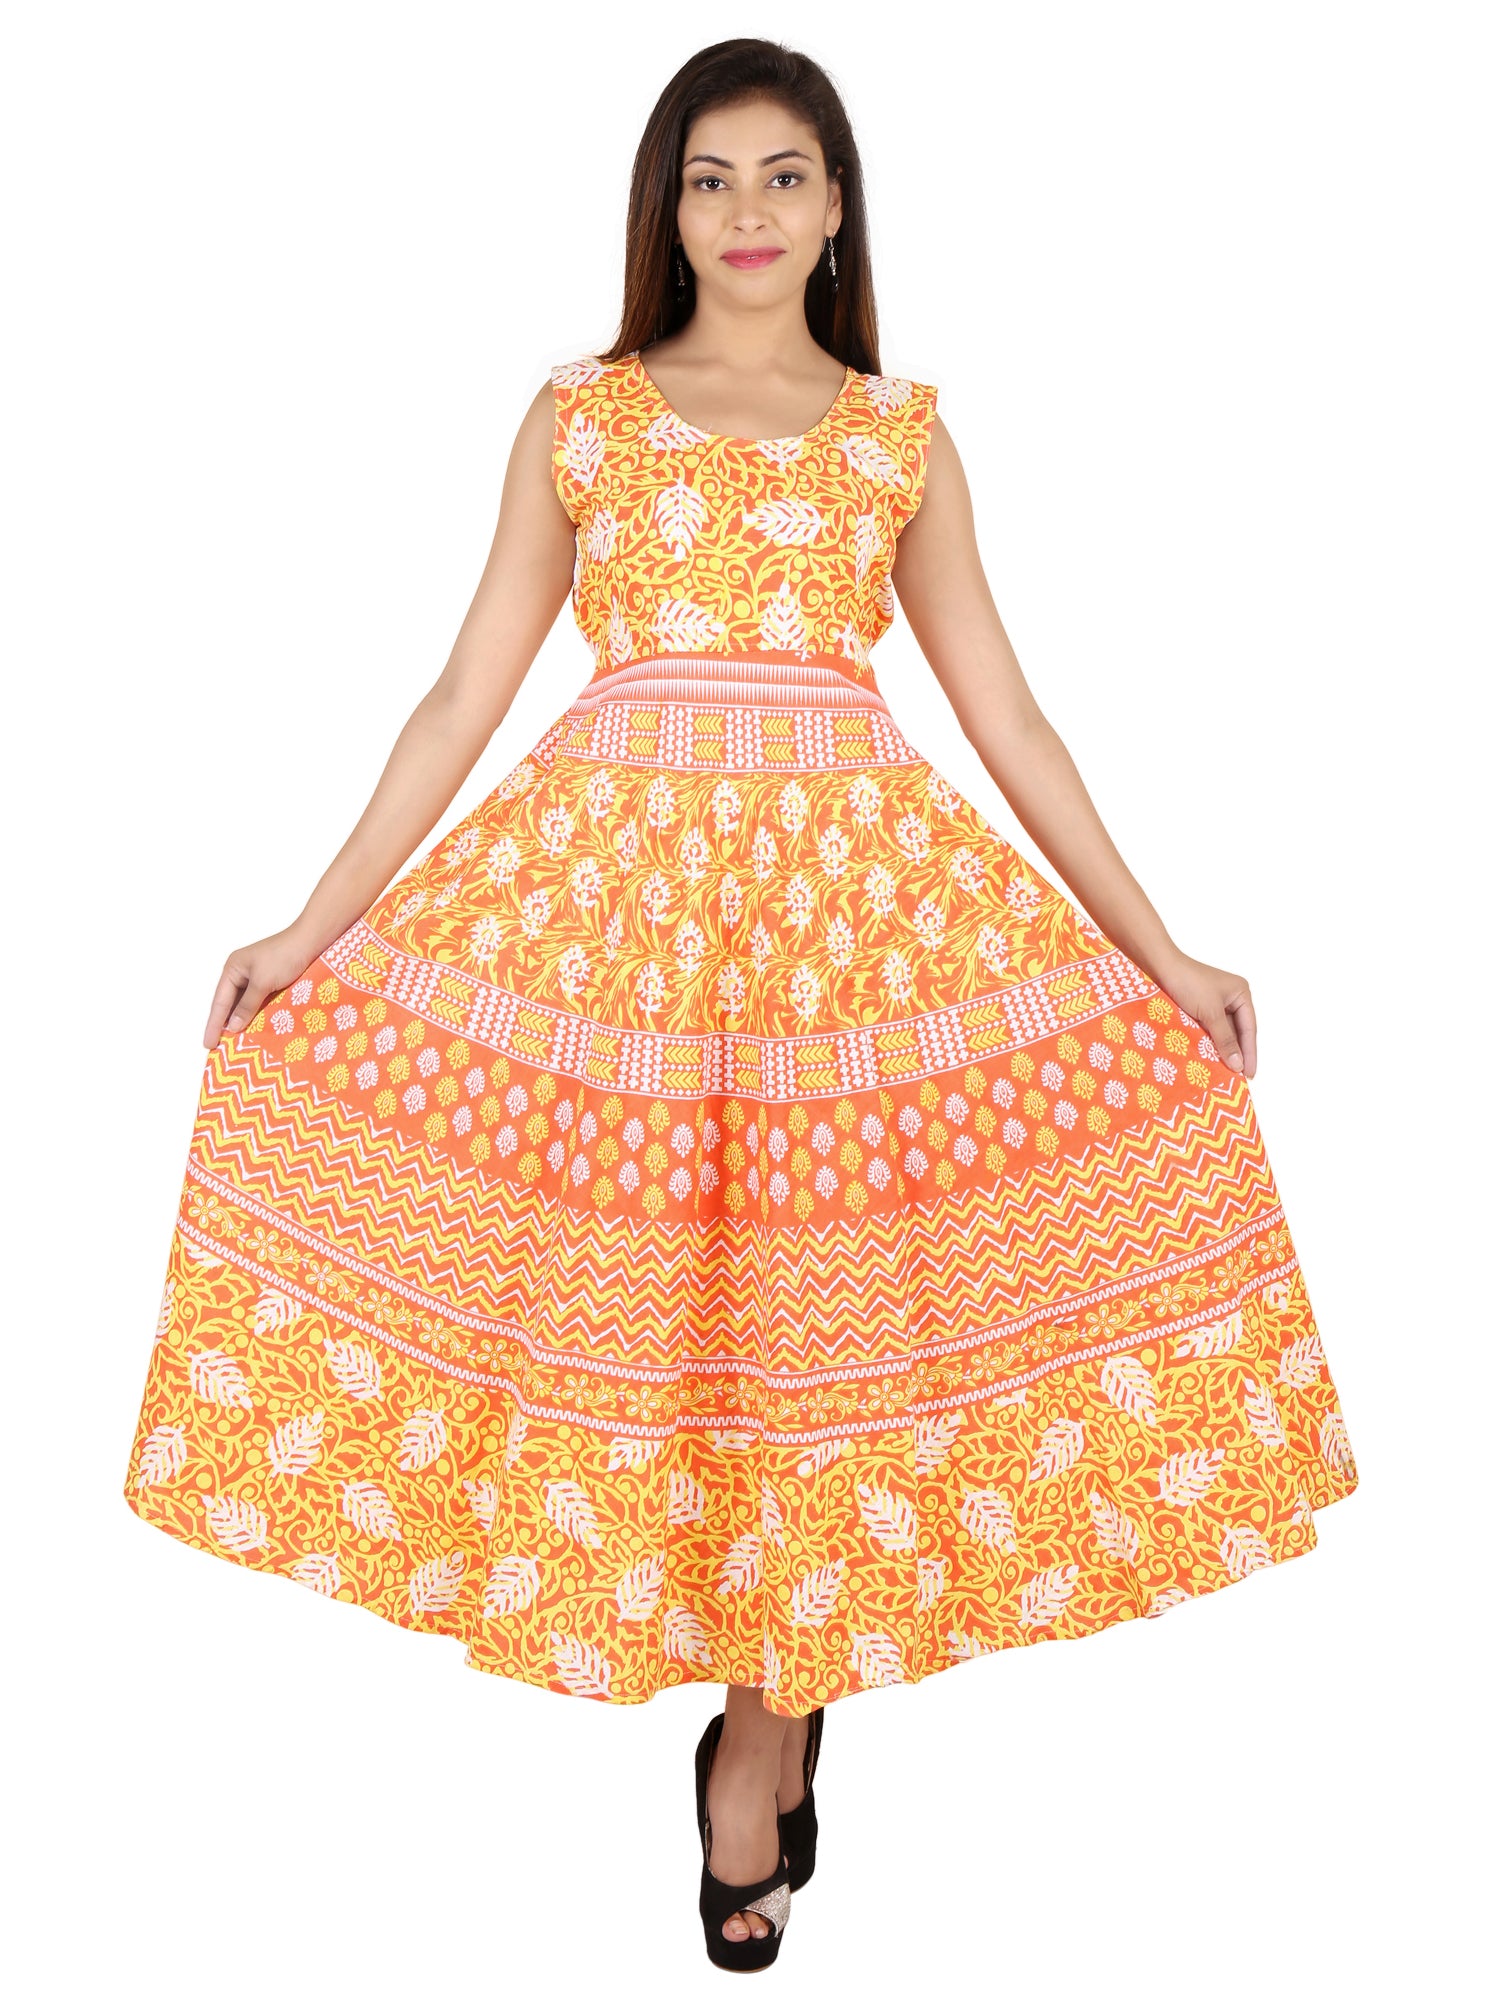 Buy Shoppingover semi Stitch Indo western Dress with Lehenga in Cotton &  Silk Blend Fabric-White Color at Amazon.in